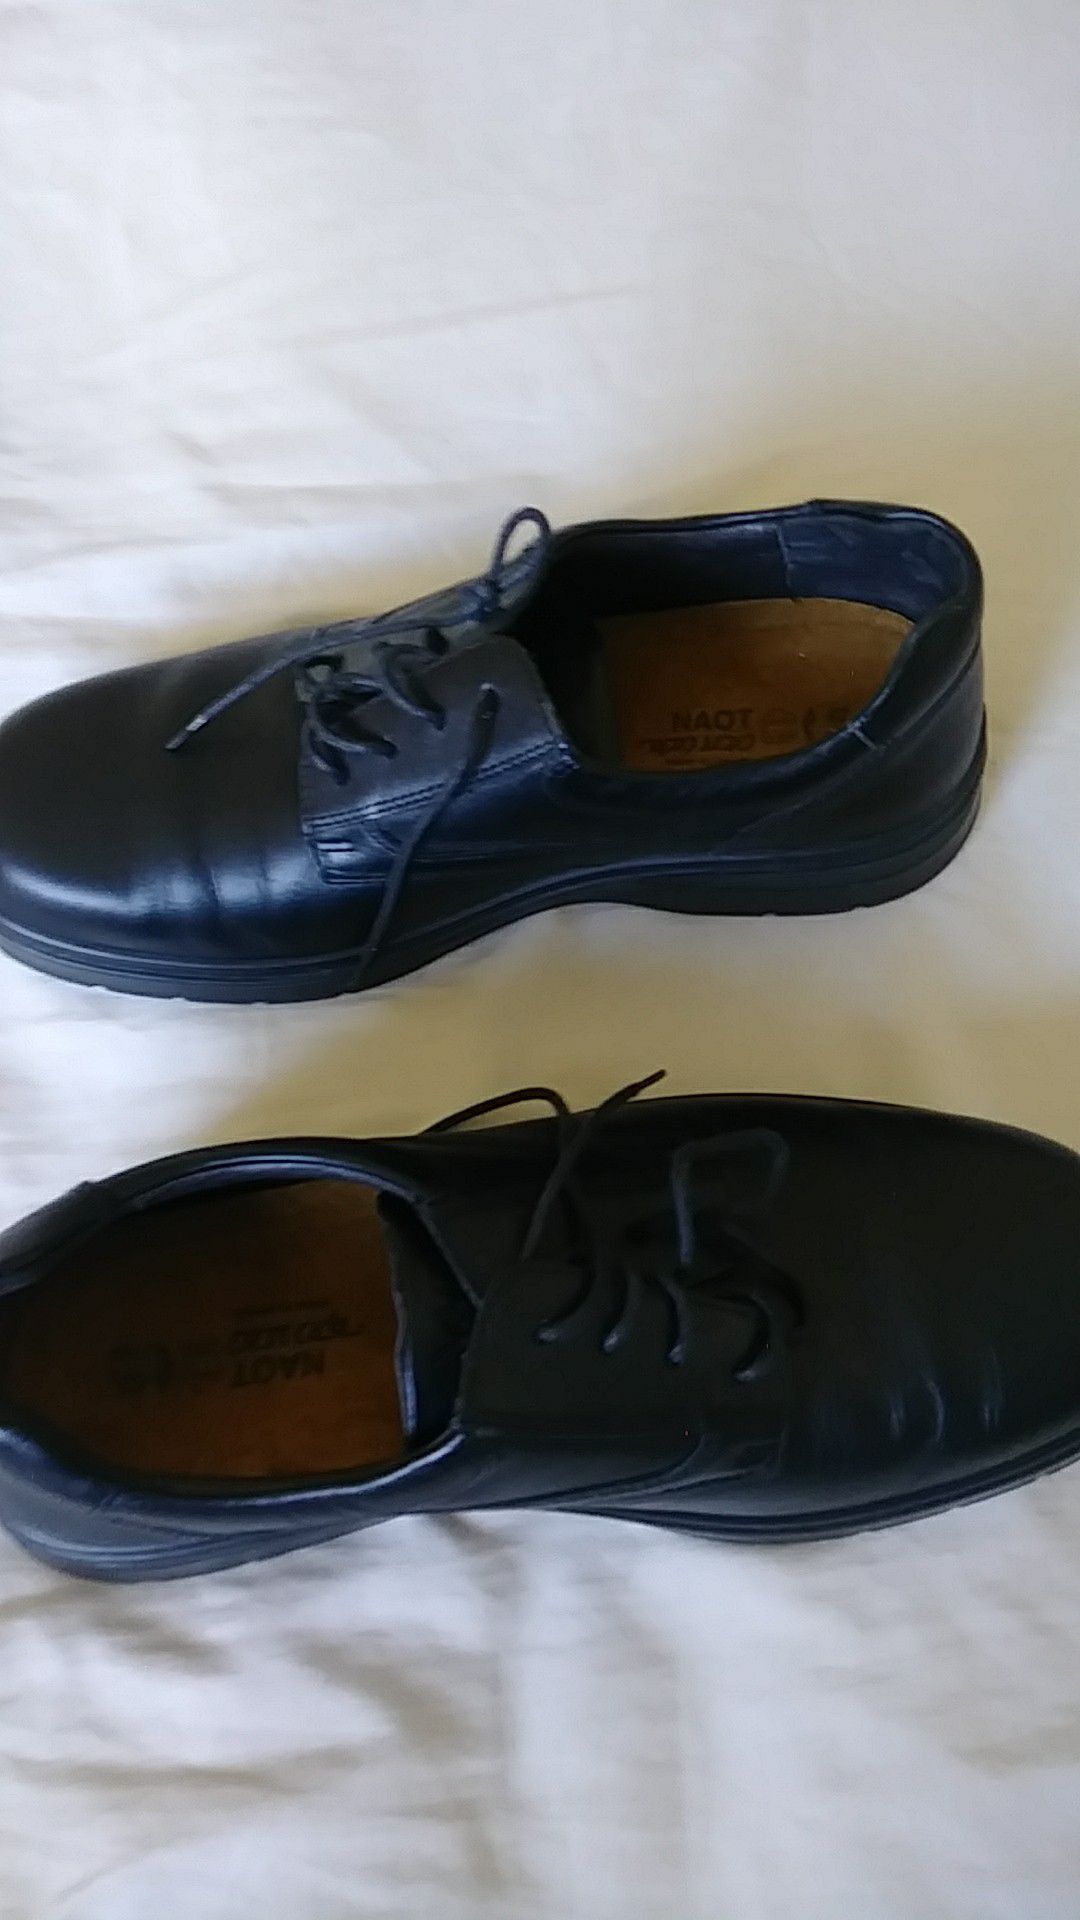 Naot shoes black size 42 9 US for Sale in Los Angeles, CA - OfferUp